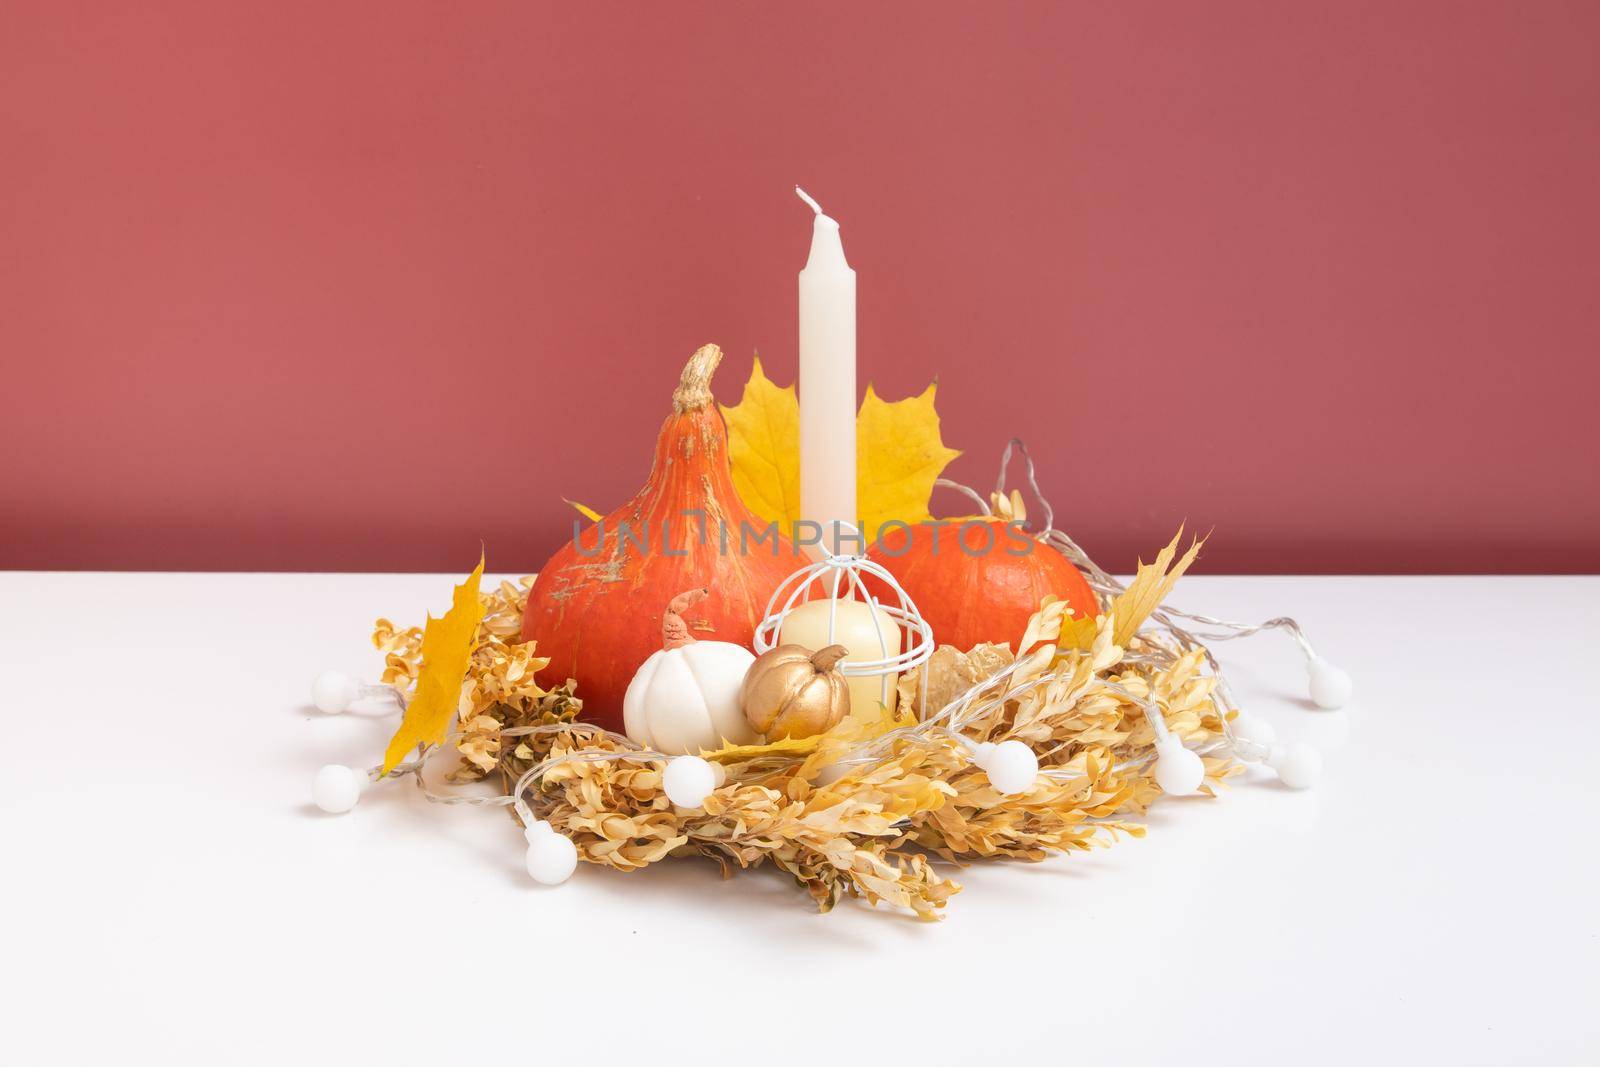 Autumn composition. Dried leaves wreath, pumpkins and candle on white pink background. Autumn fall and thanksgiving day concept. Still life.